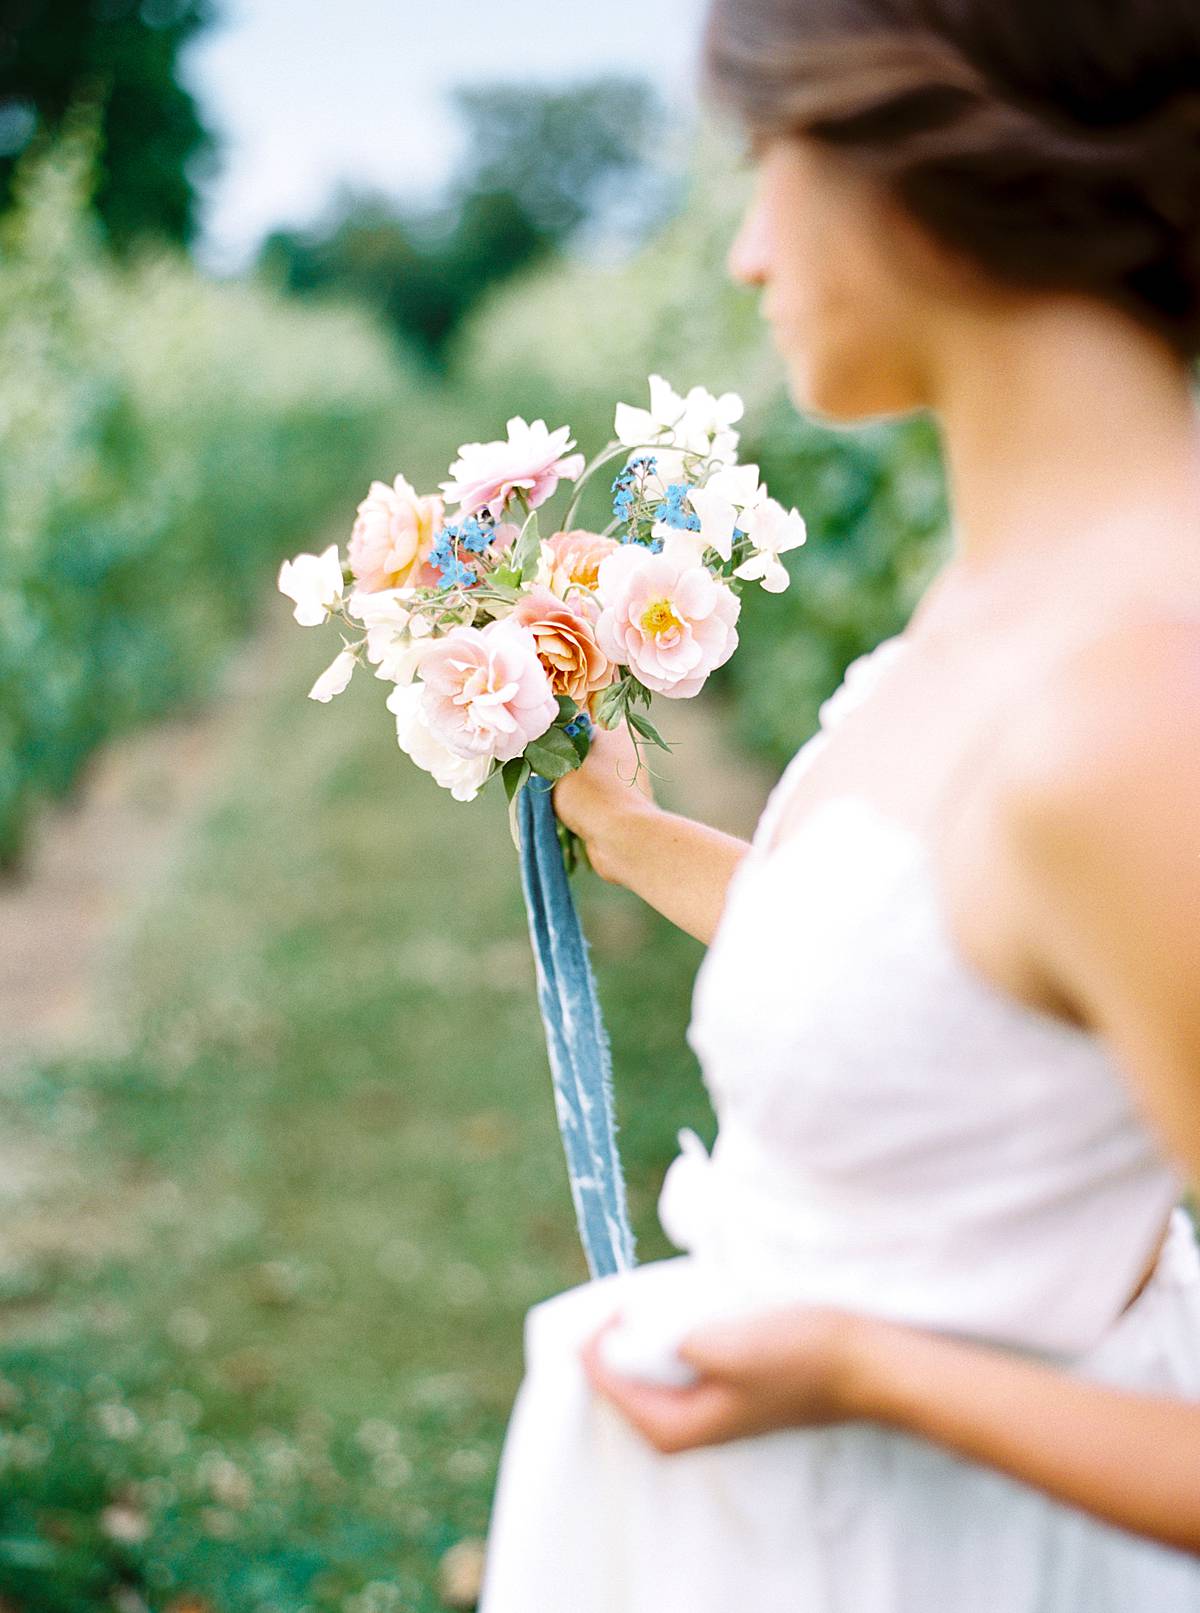 bridal bouquet shot with contax 645 wide open at f2 for shallow depth of field and bokeh on contax 645